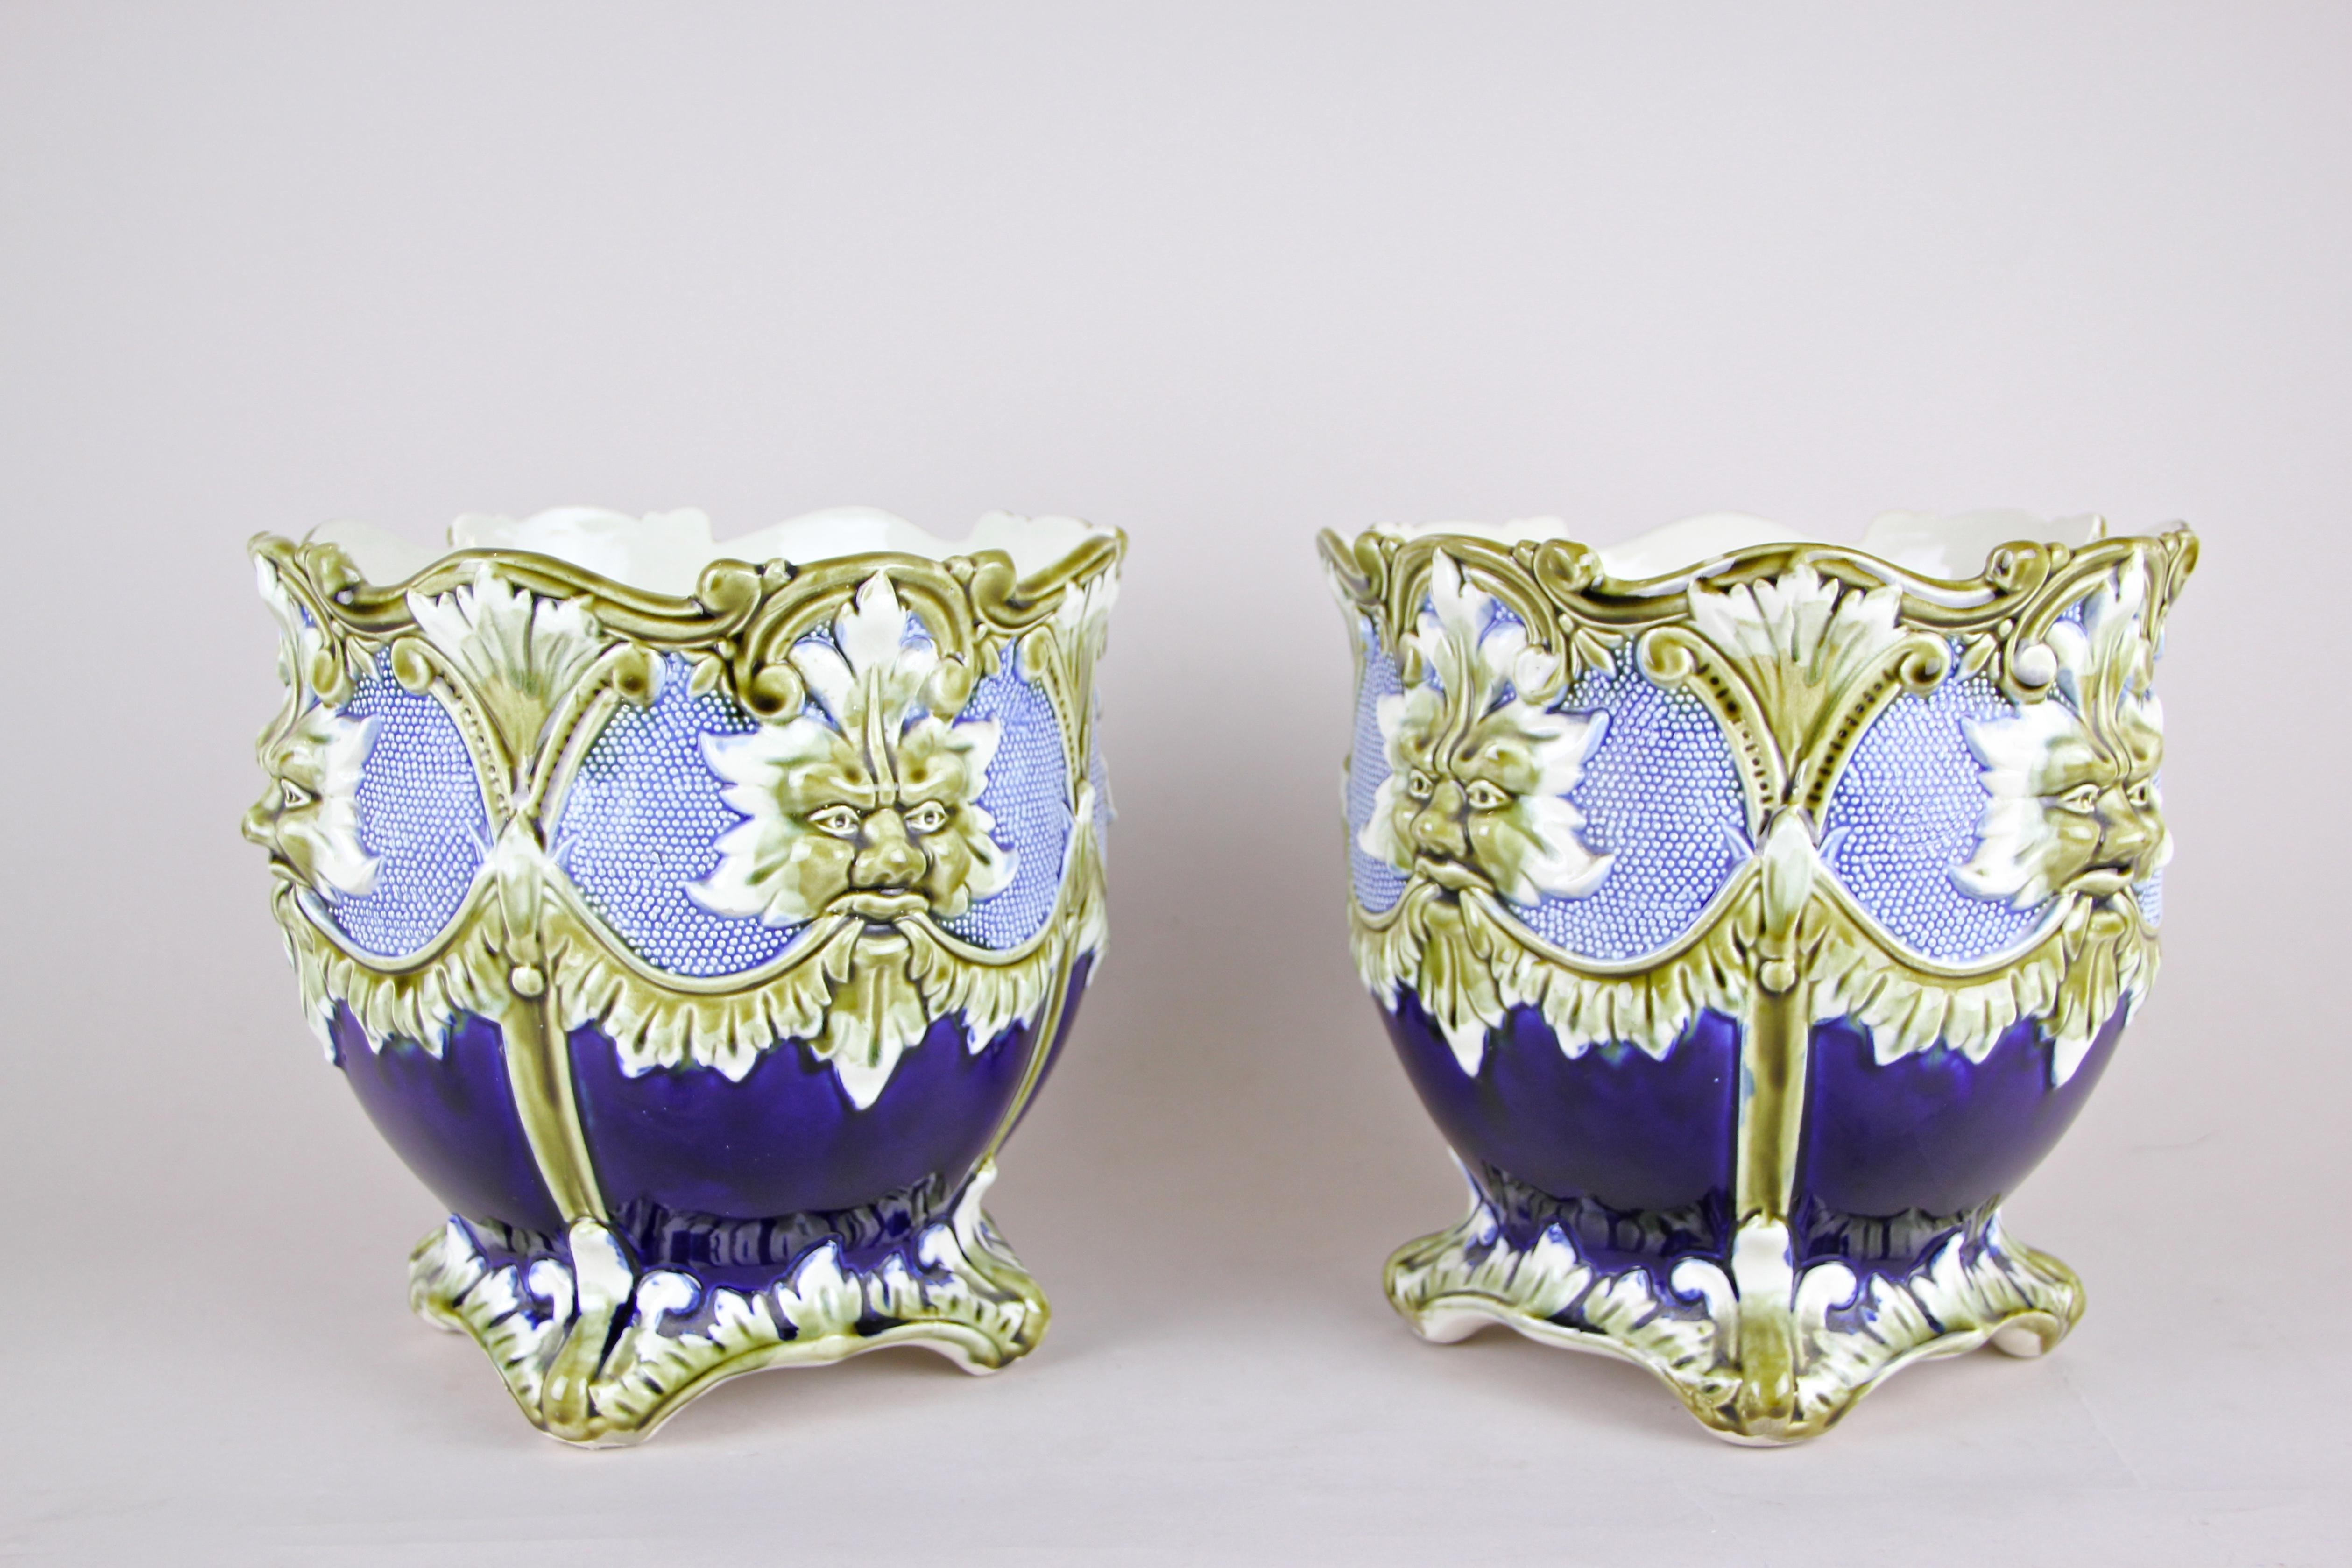 Hand-Painted Majolica Cachepot Set of Three by B. De Bruyne Art Nouveau, France, circa 1900